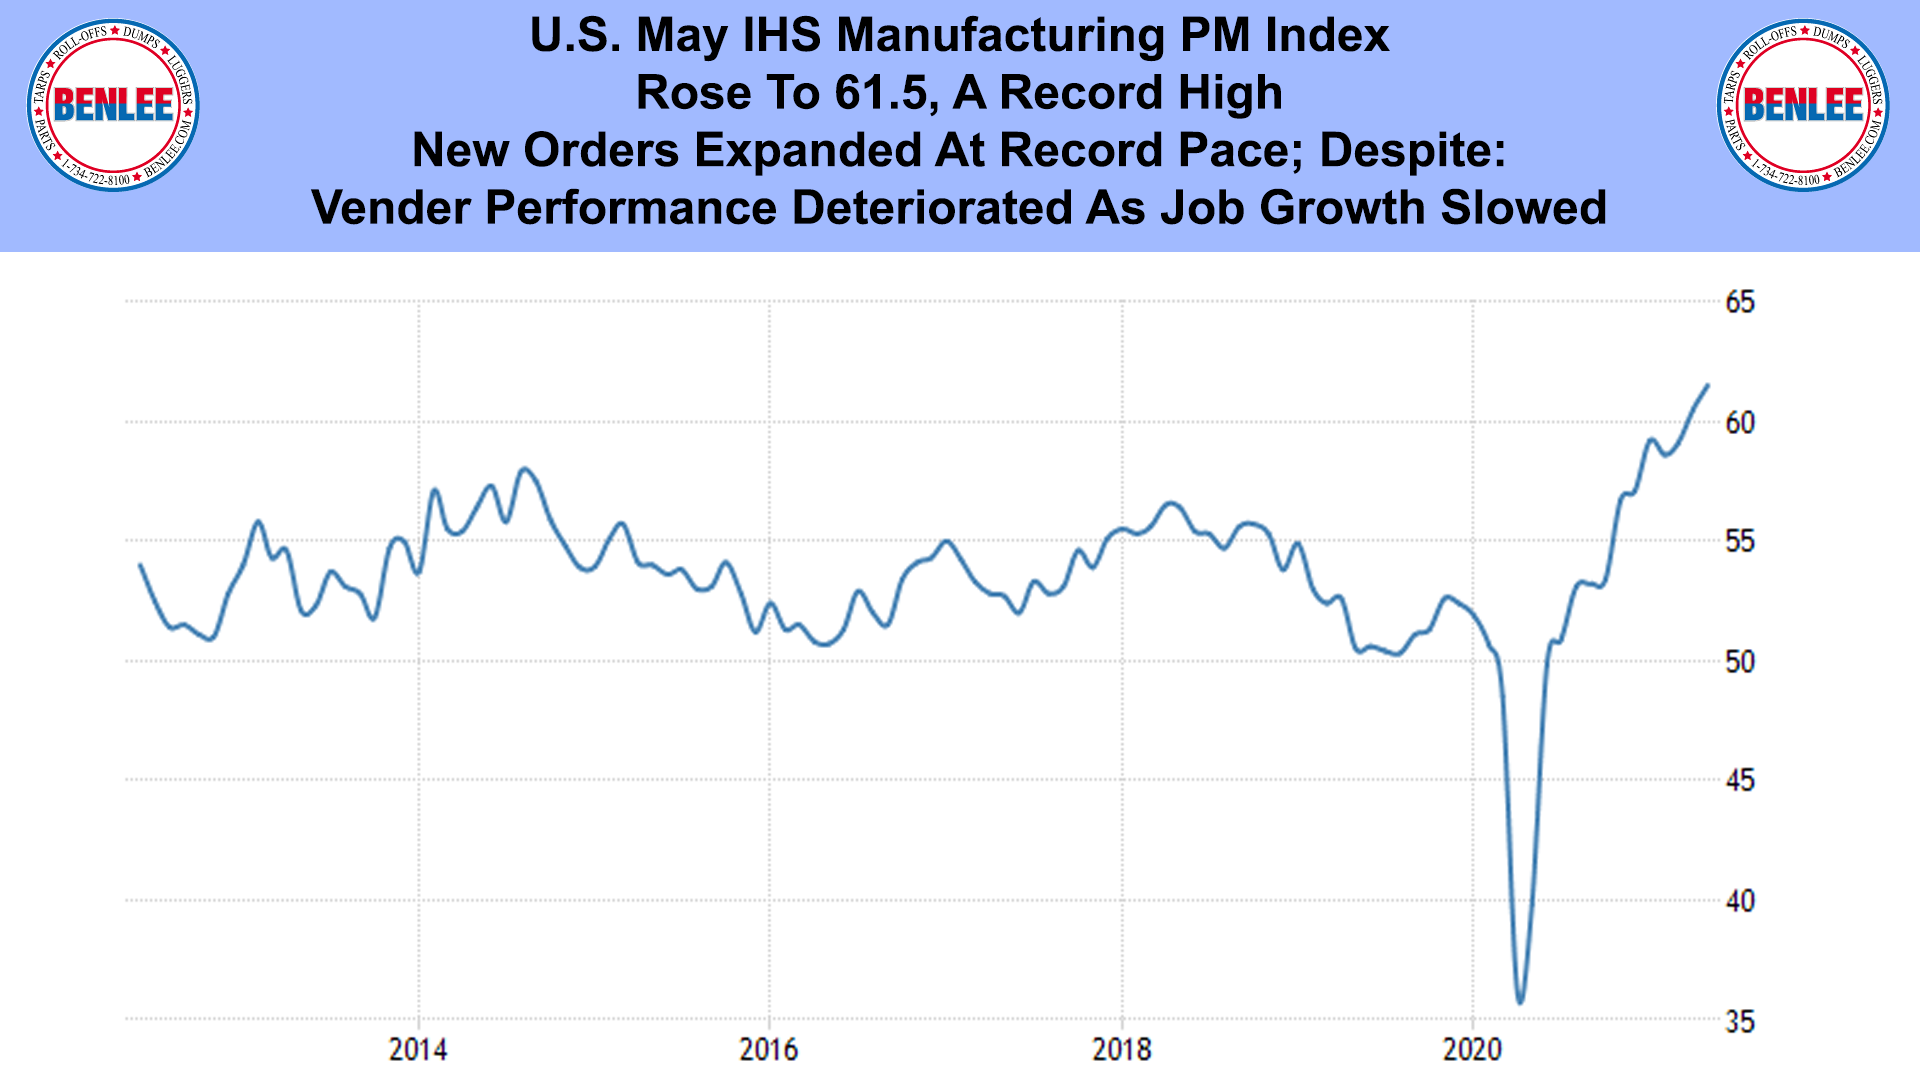 U.S. May IHS Manufacturing PM Index